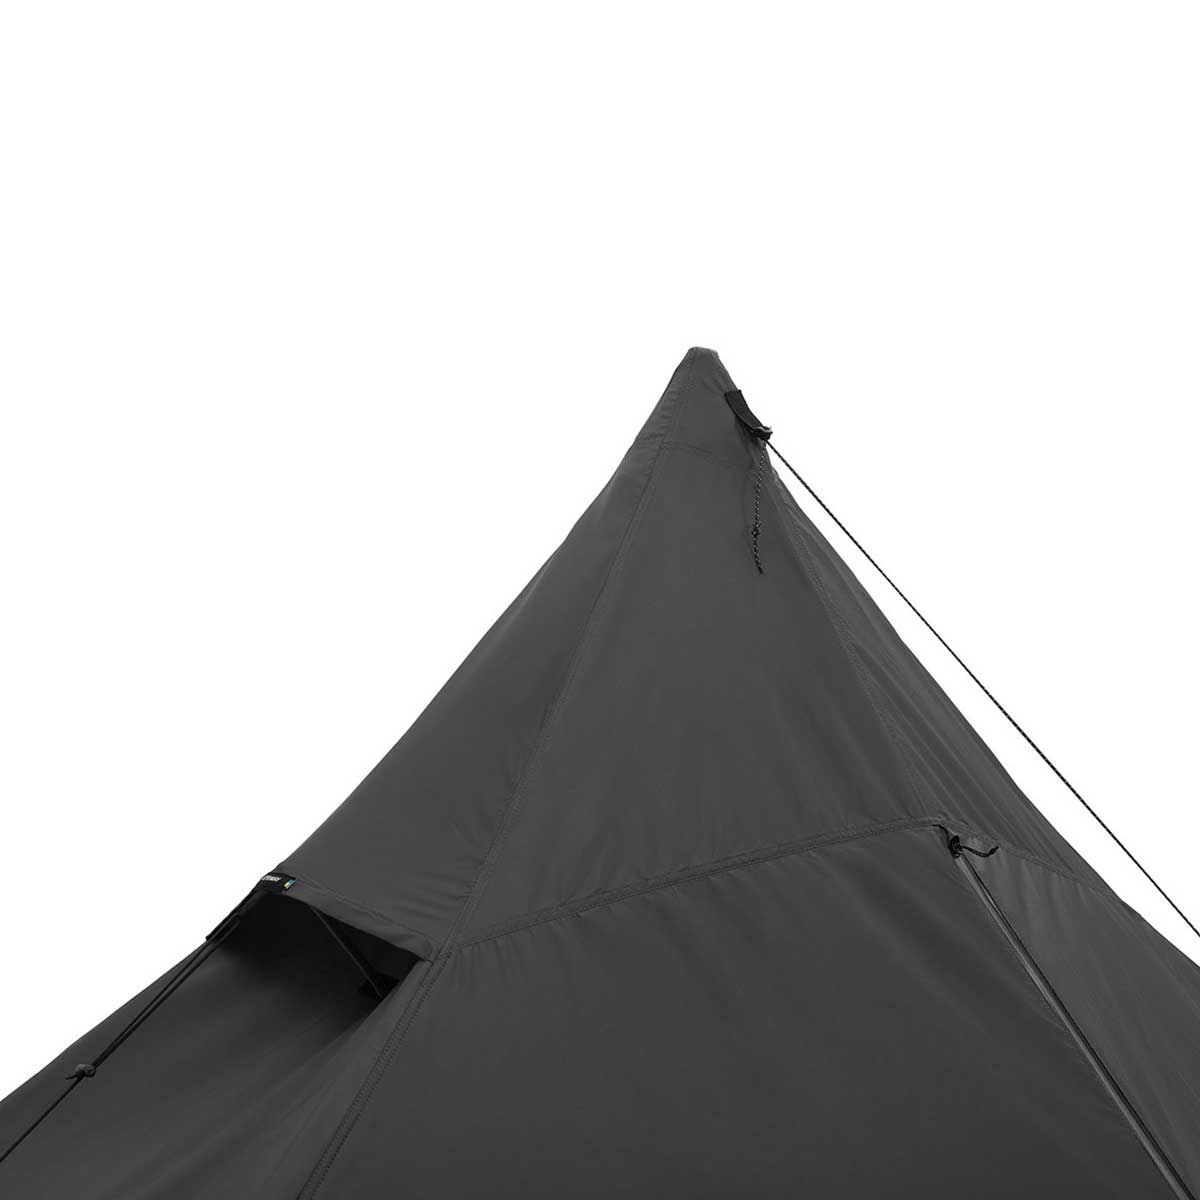 Liteway Illusion Solo backpacking tent - 1 person